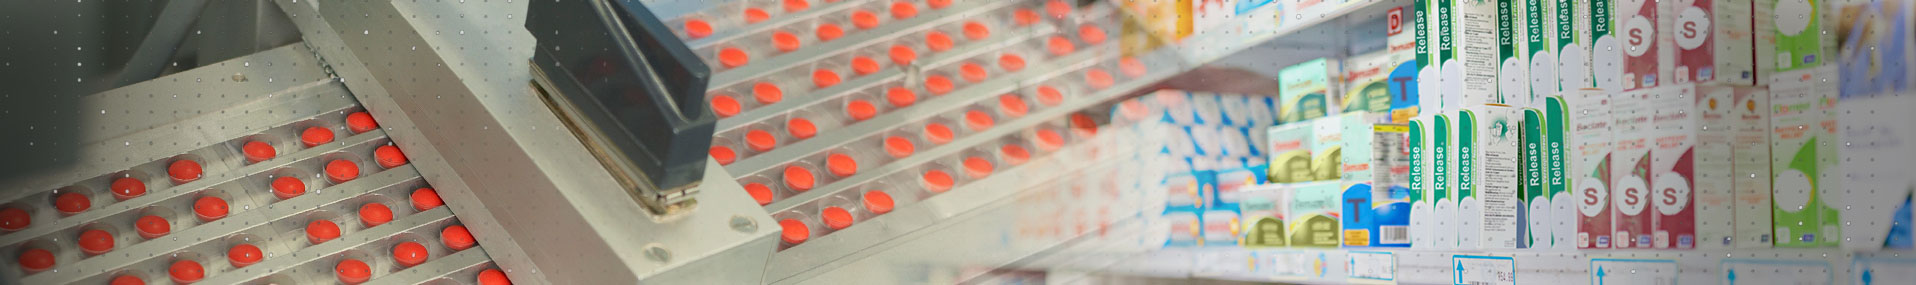 Pharmaceutical pills in production and boxed on shelves